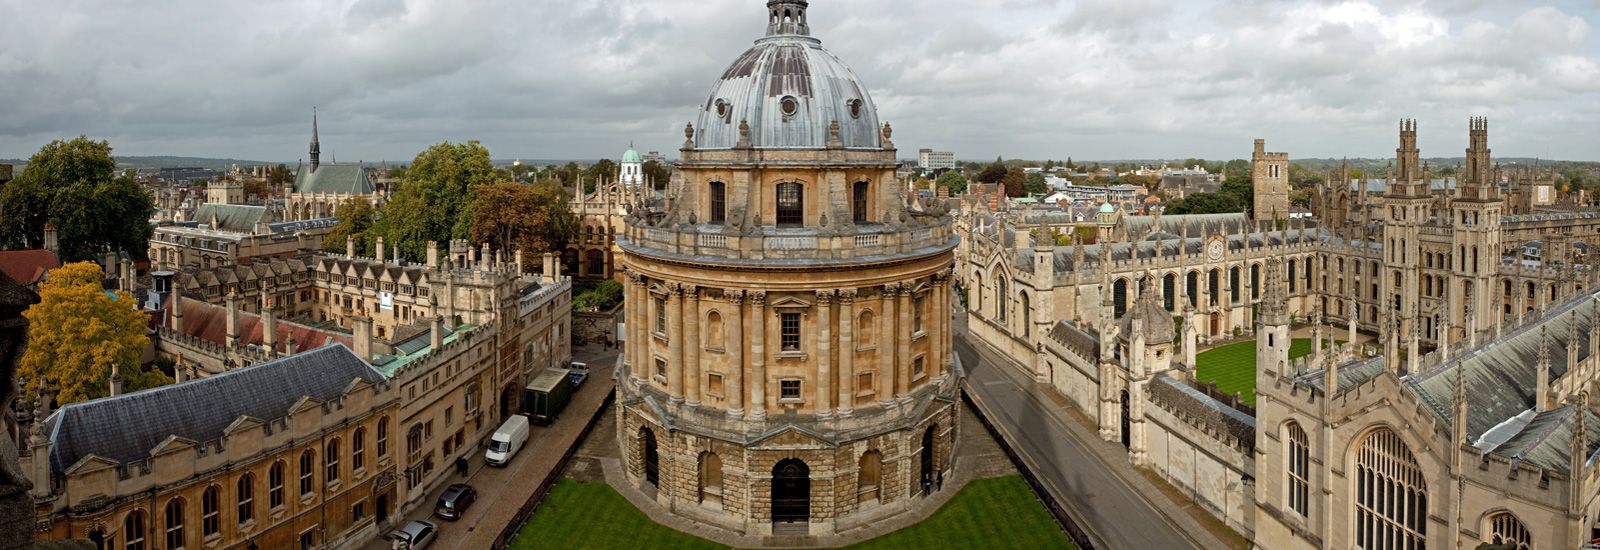 About the city  University of Oxford